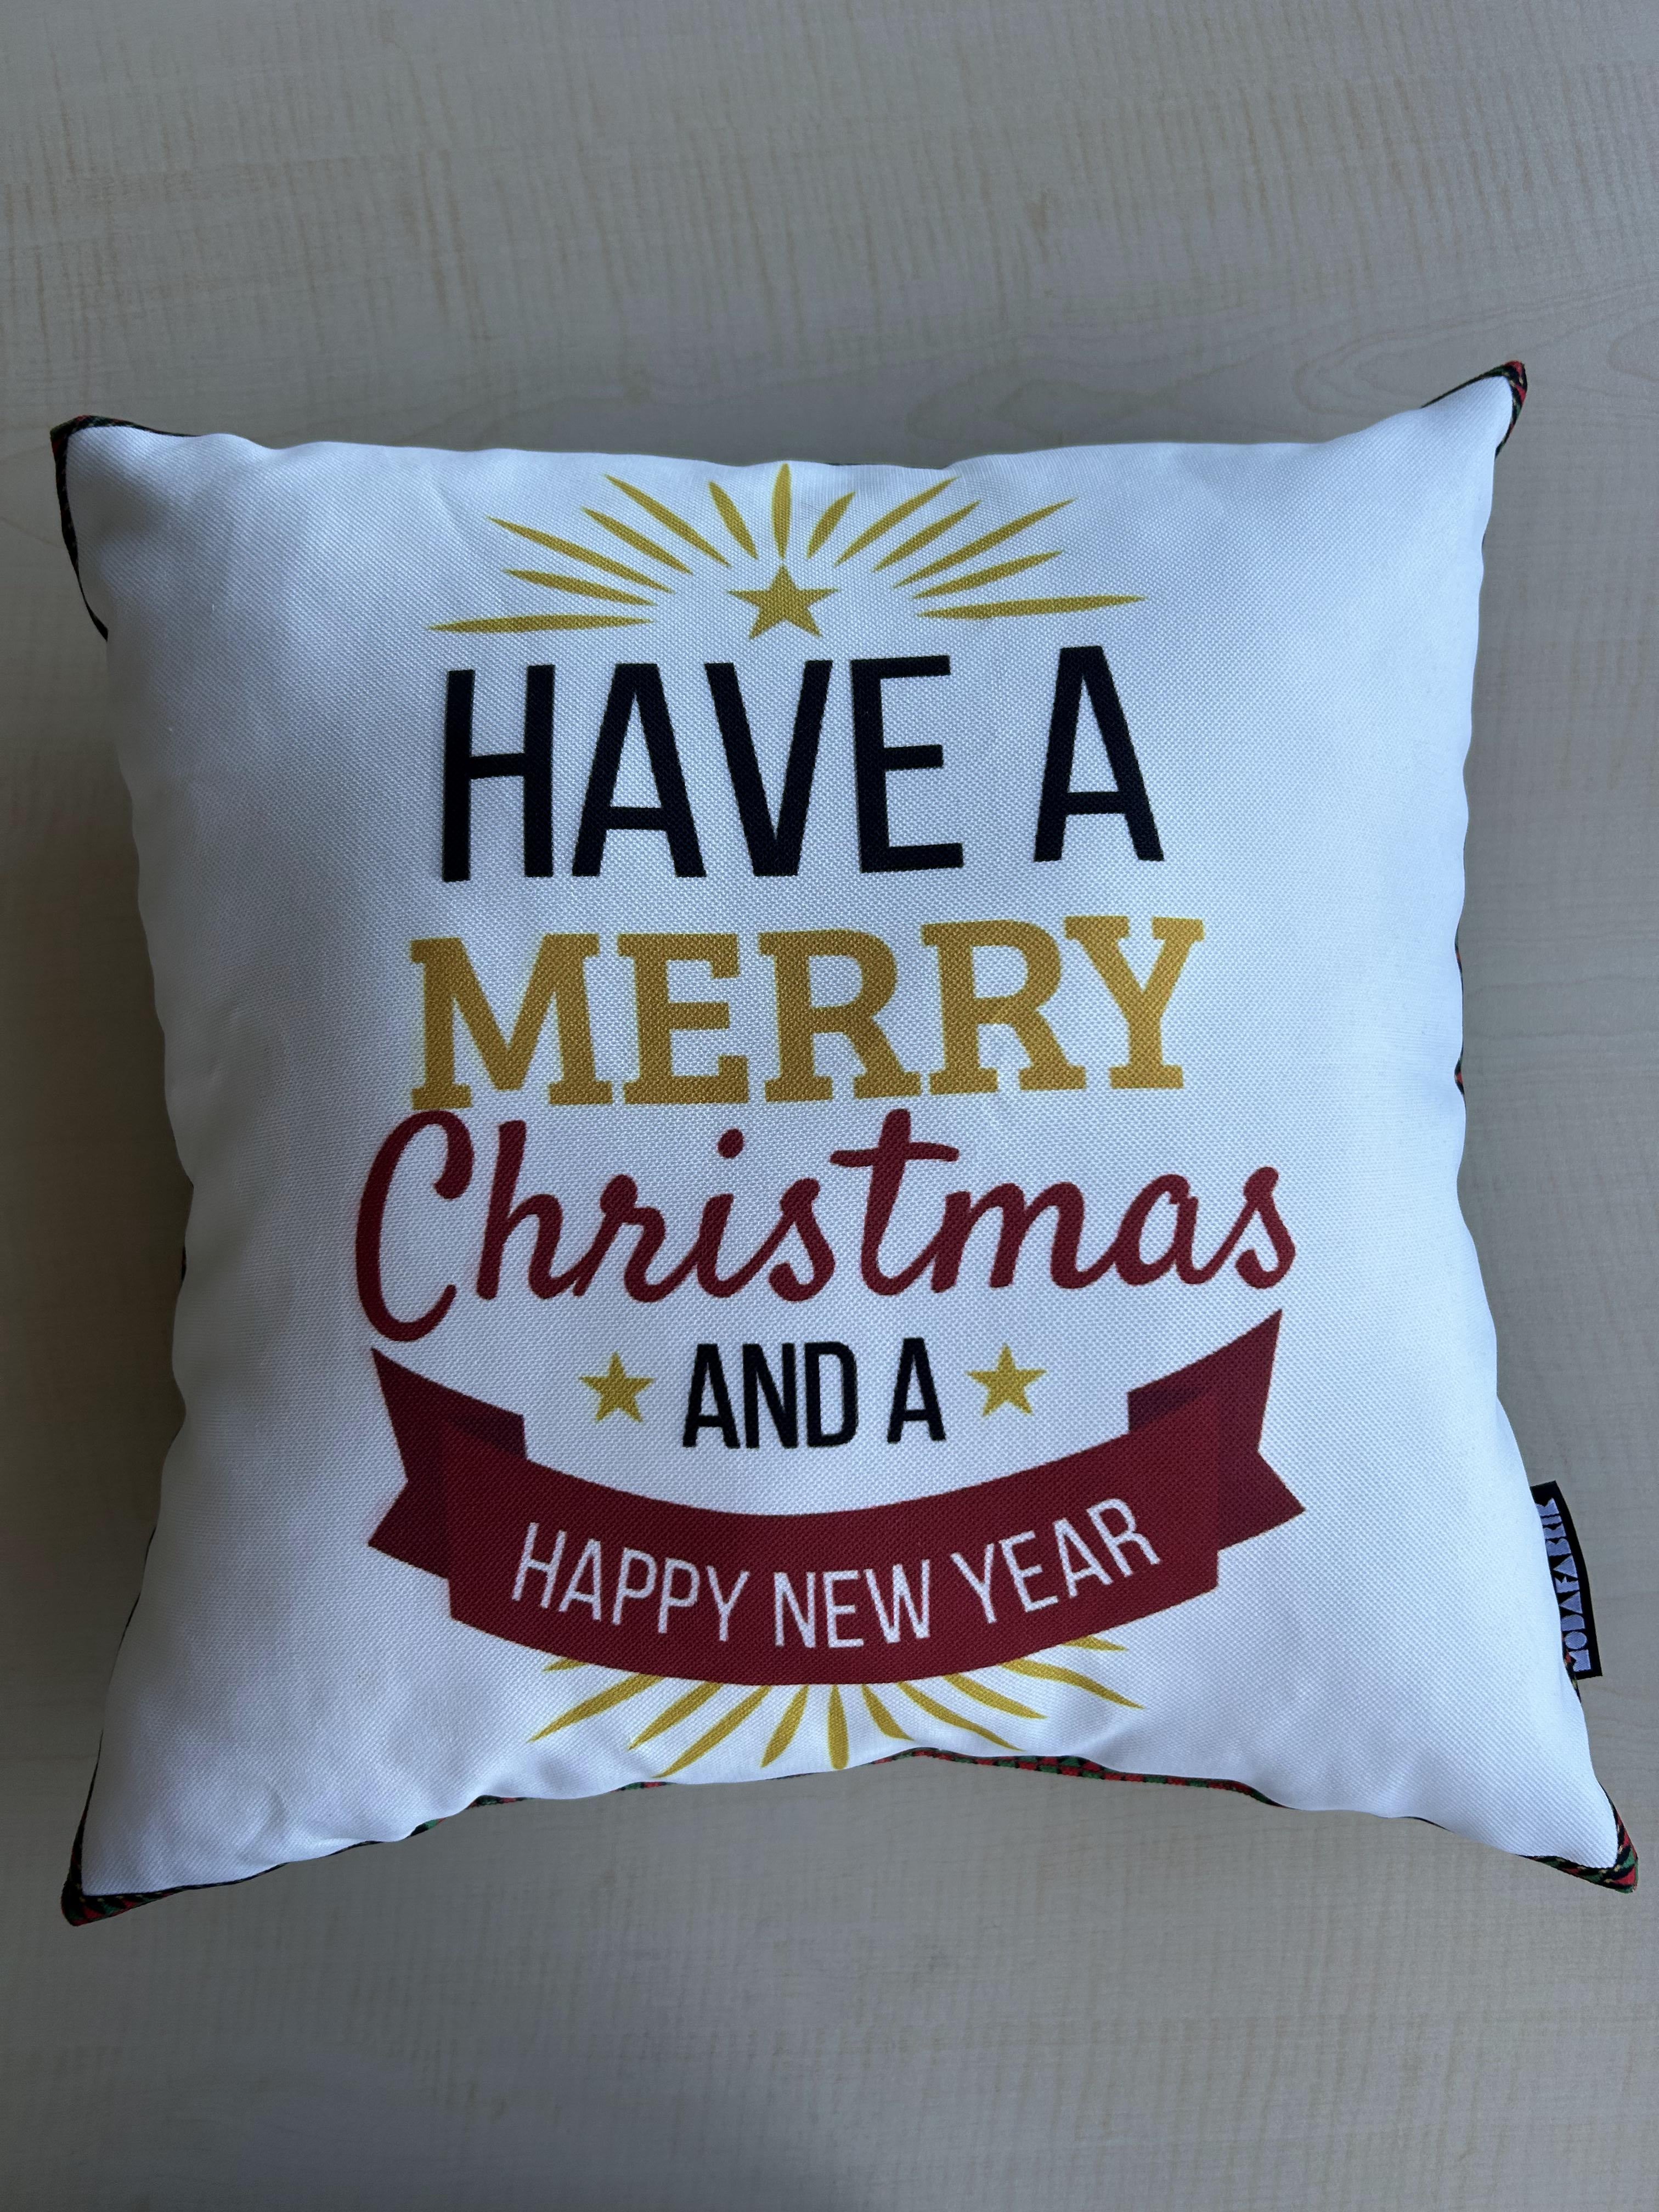 Christmas Pillow Cover, New Year Pillow Cover, Holiday Greetings Pattern Pillow Cover, Square 17"x17" - Wear Sierra